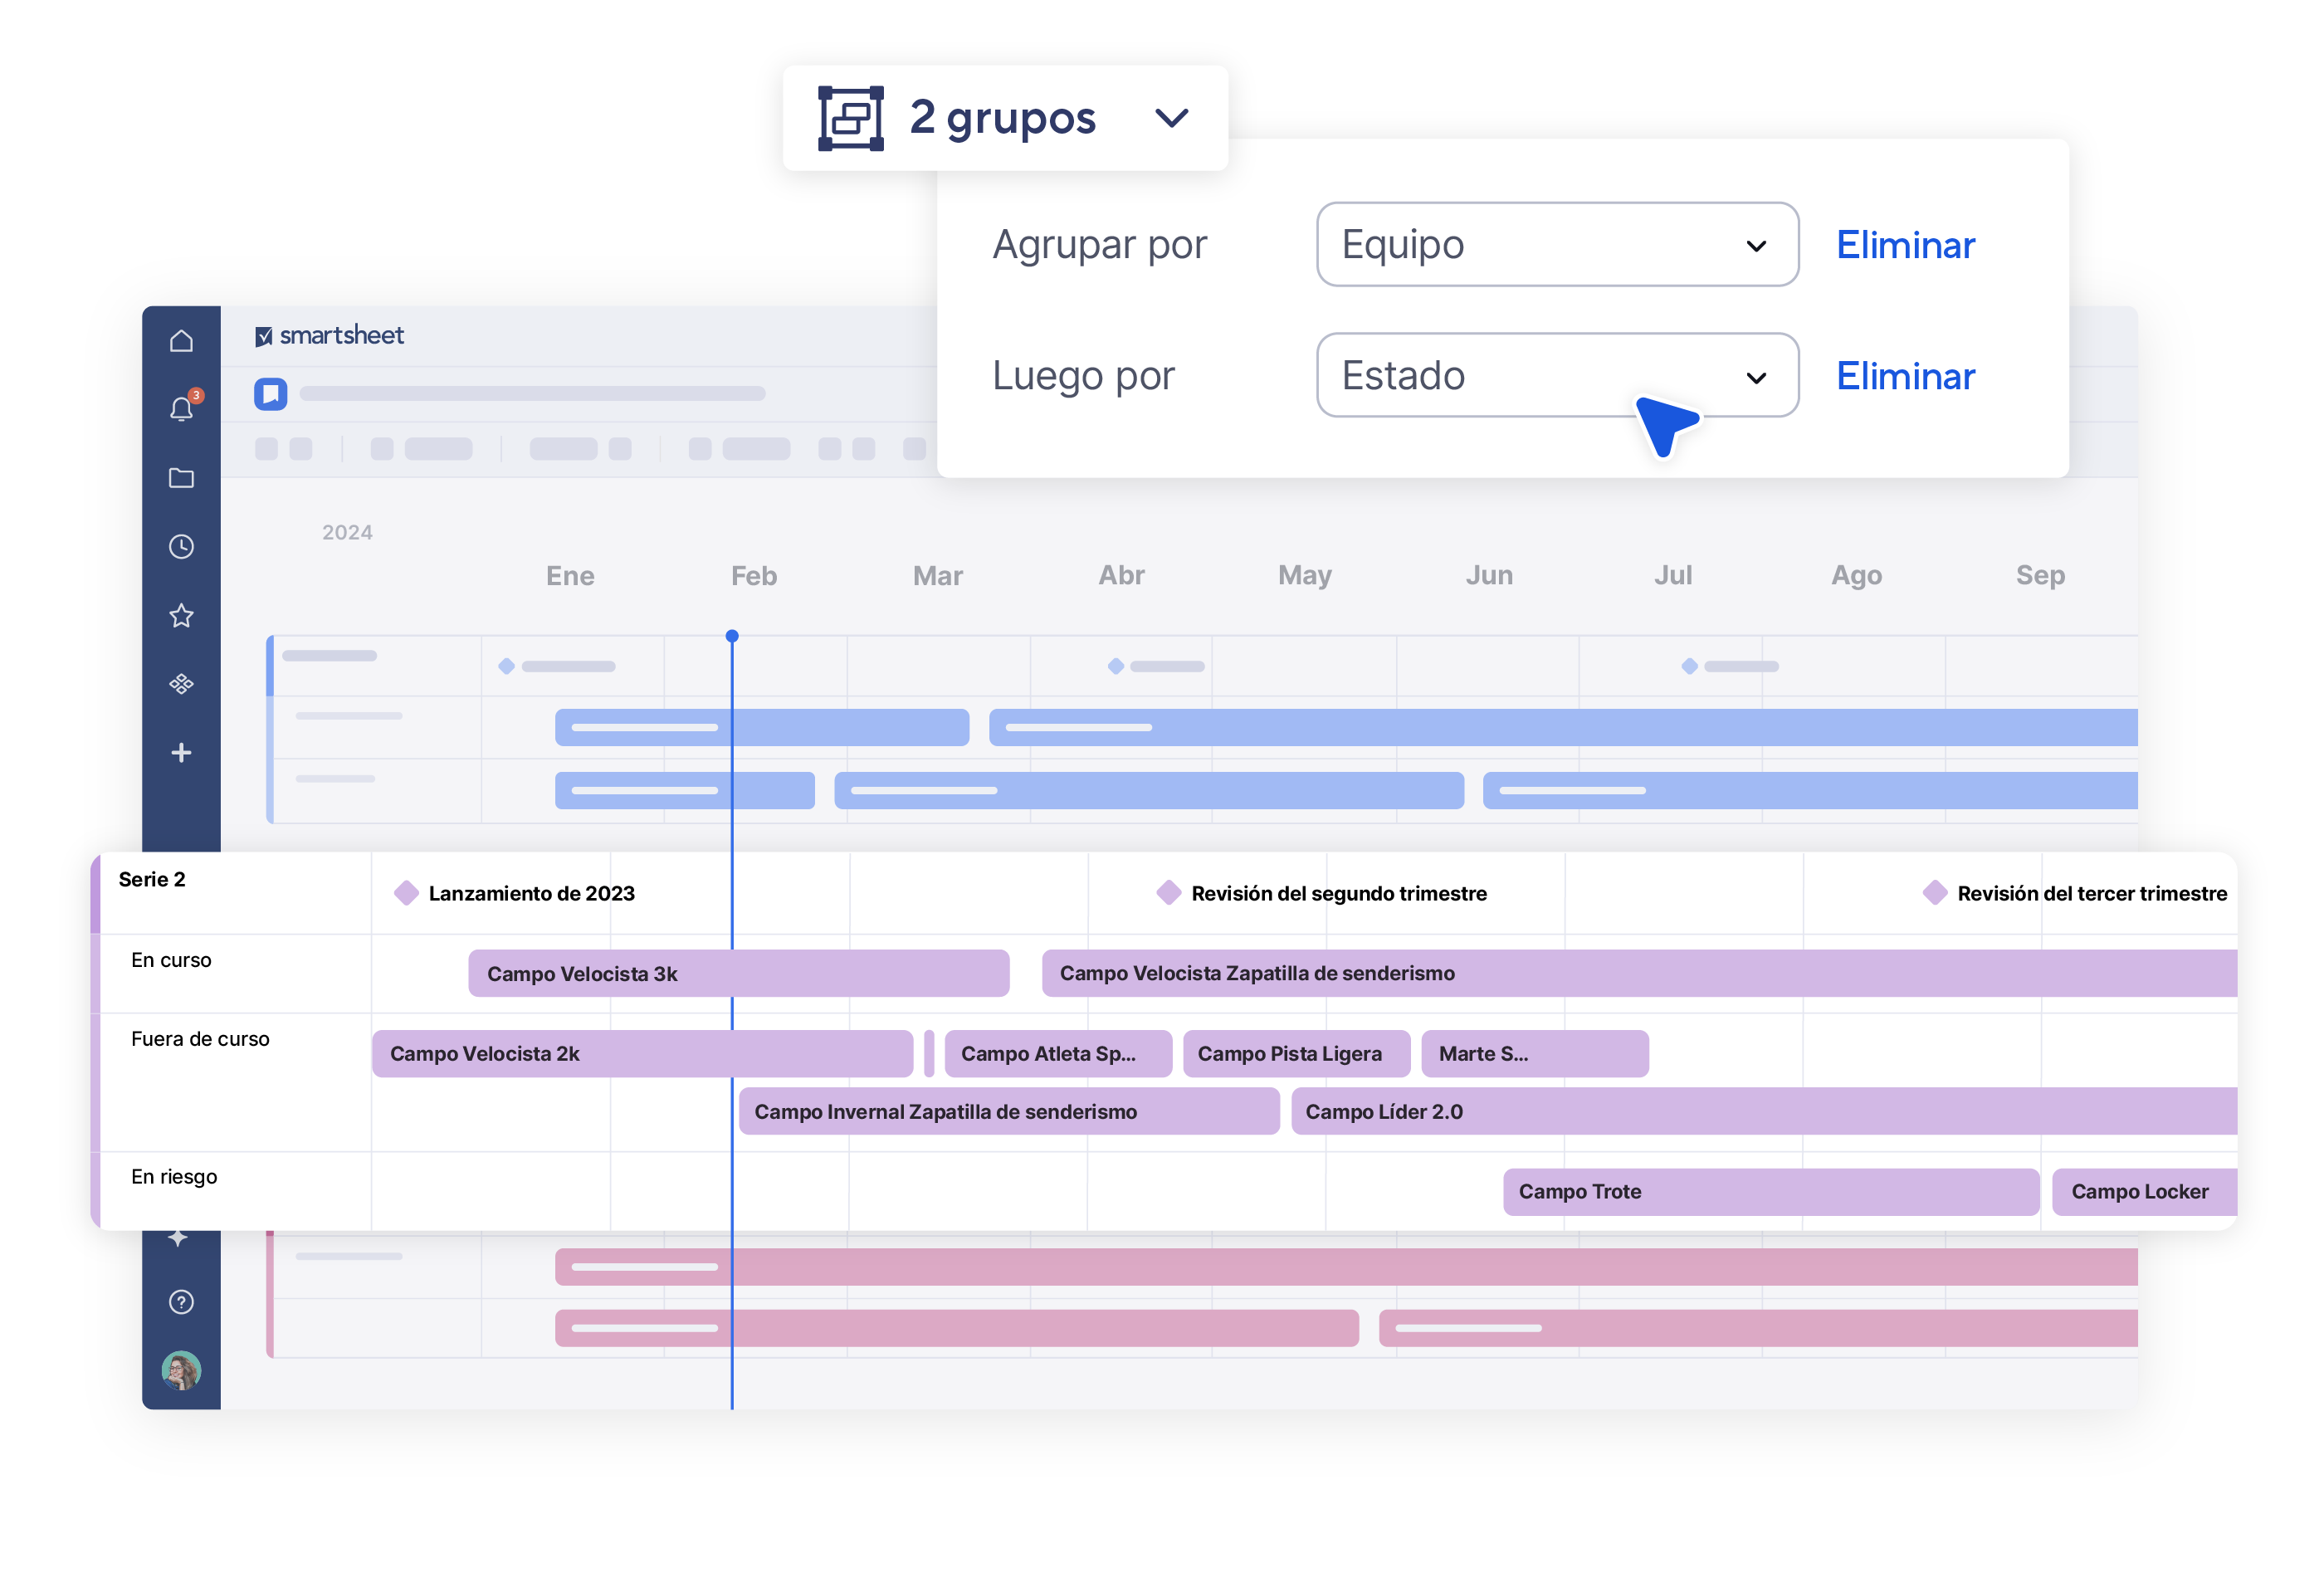 Features Timeline View